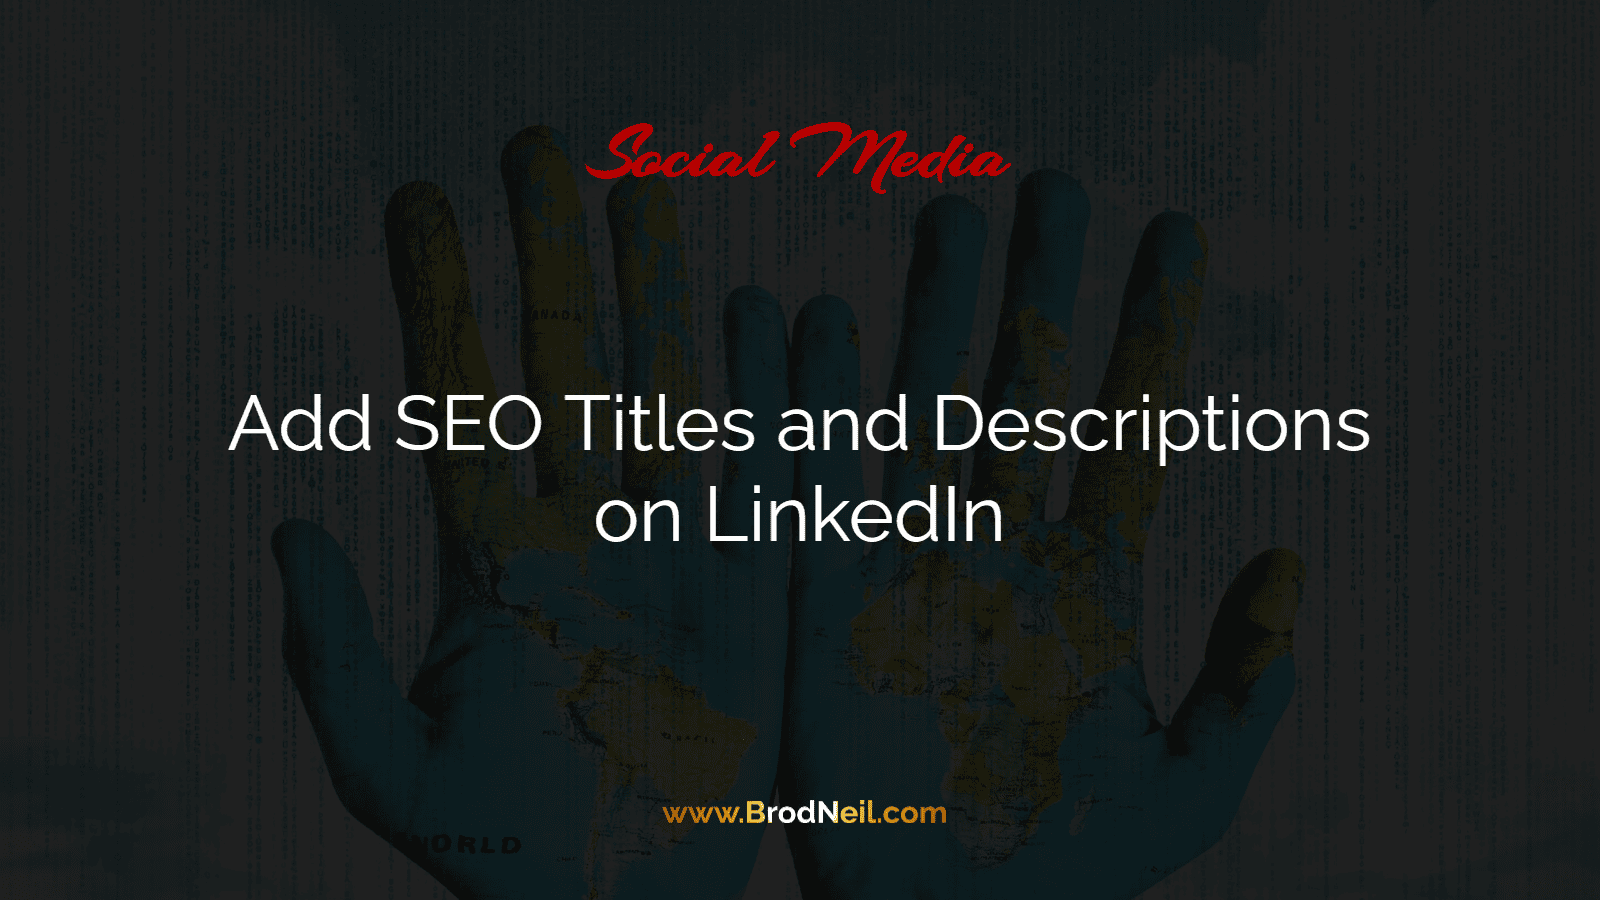 Add SEO Titles and Descriptions on LinkedIn